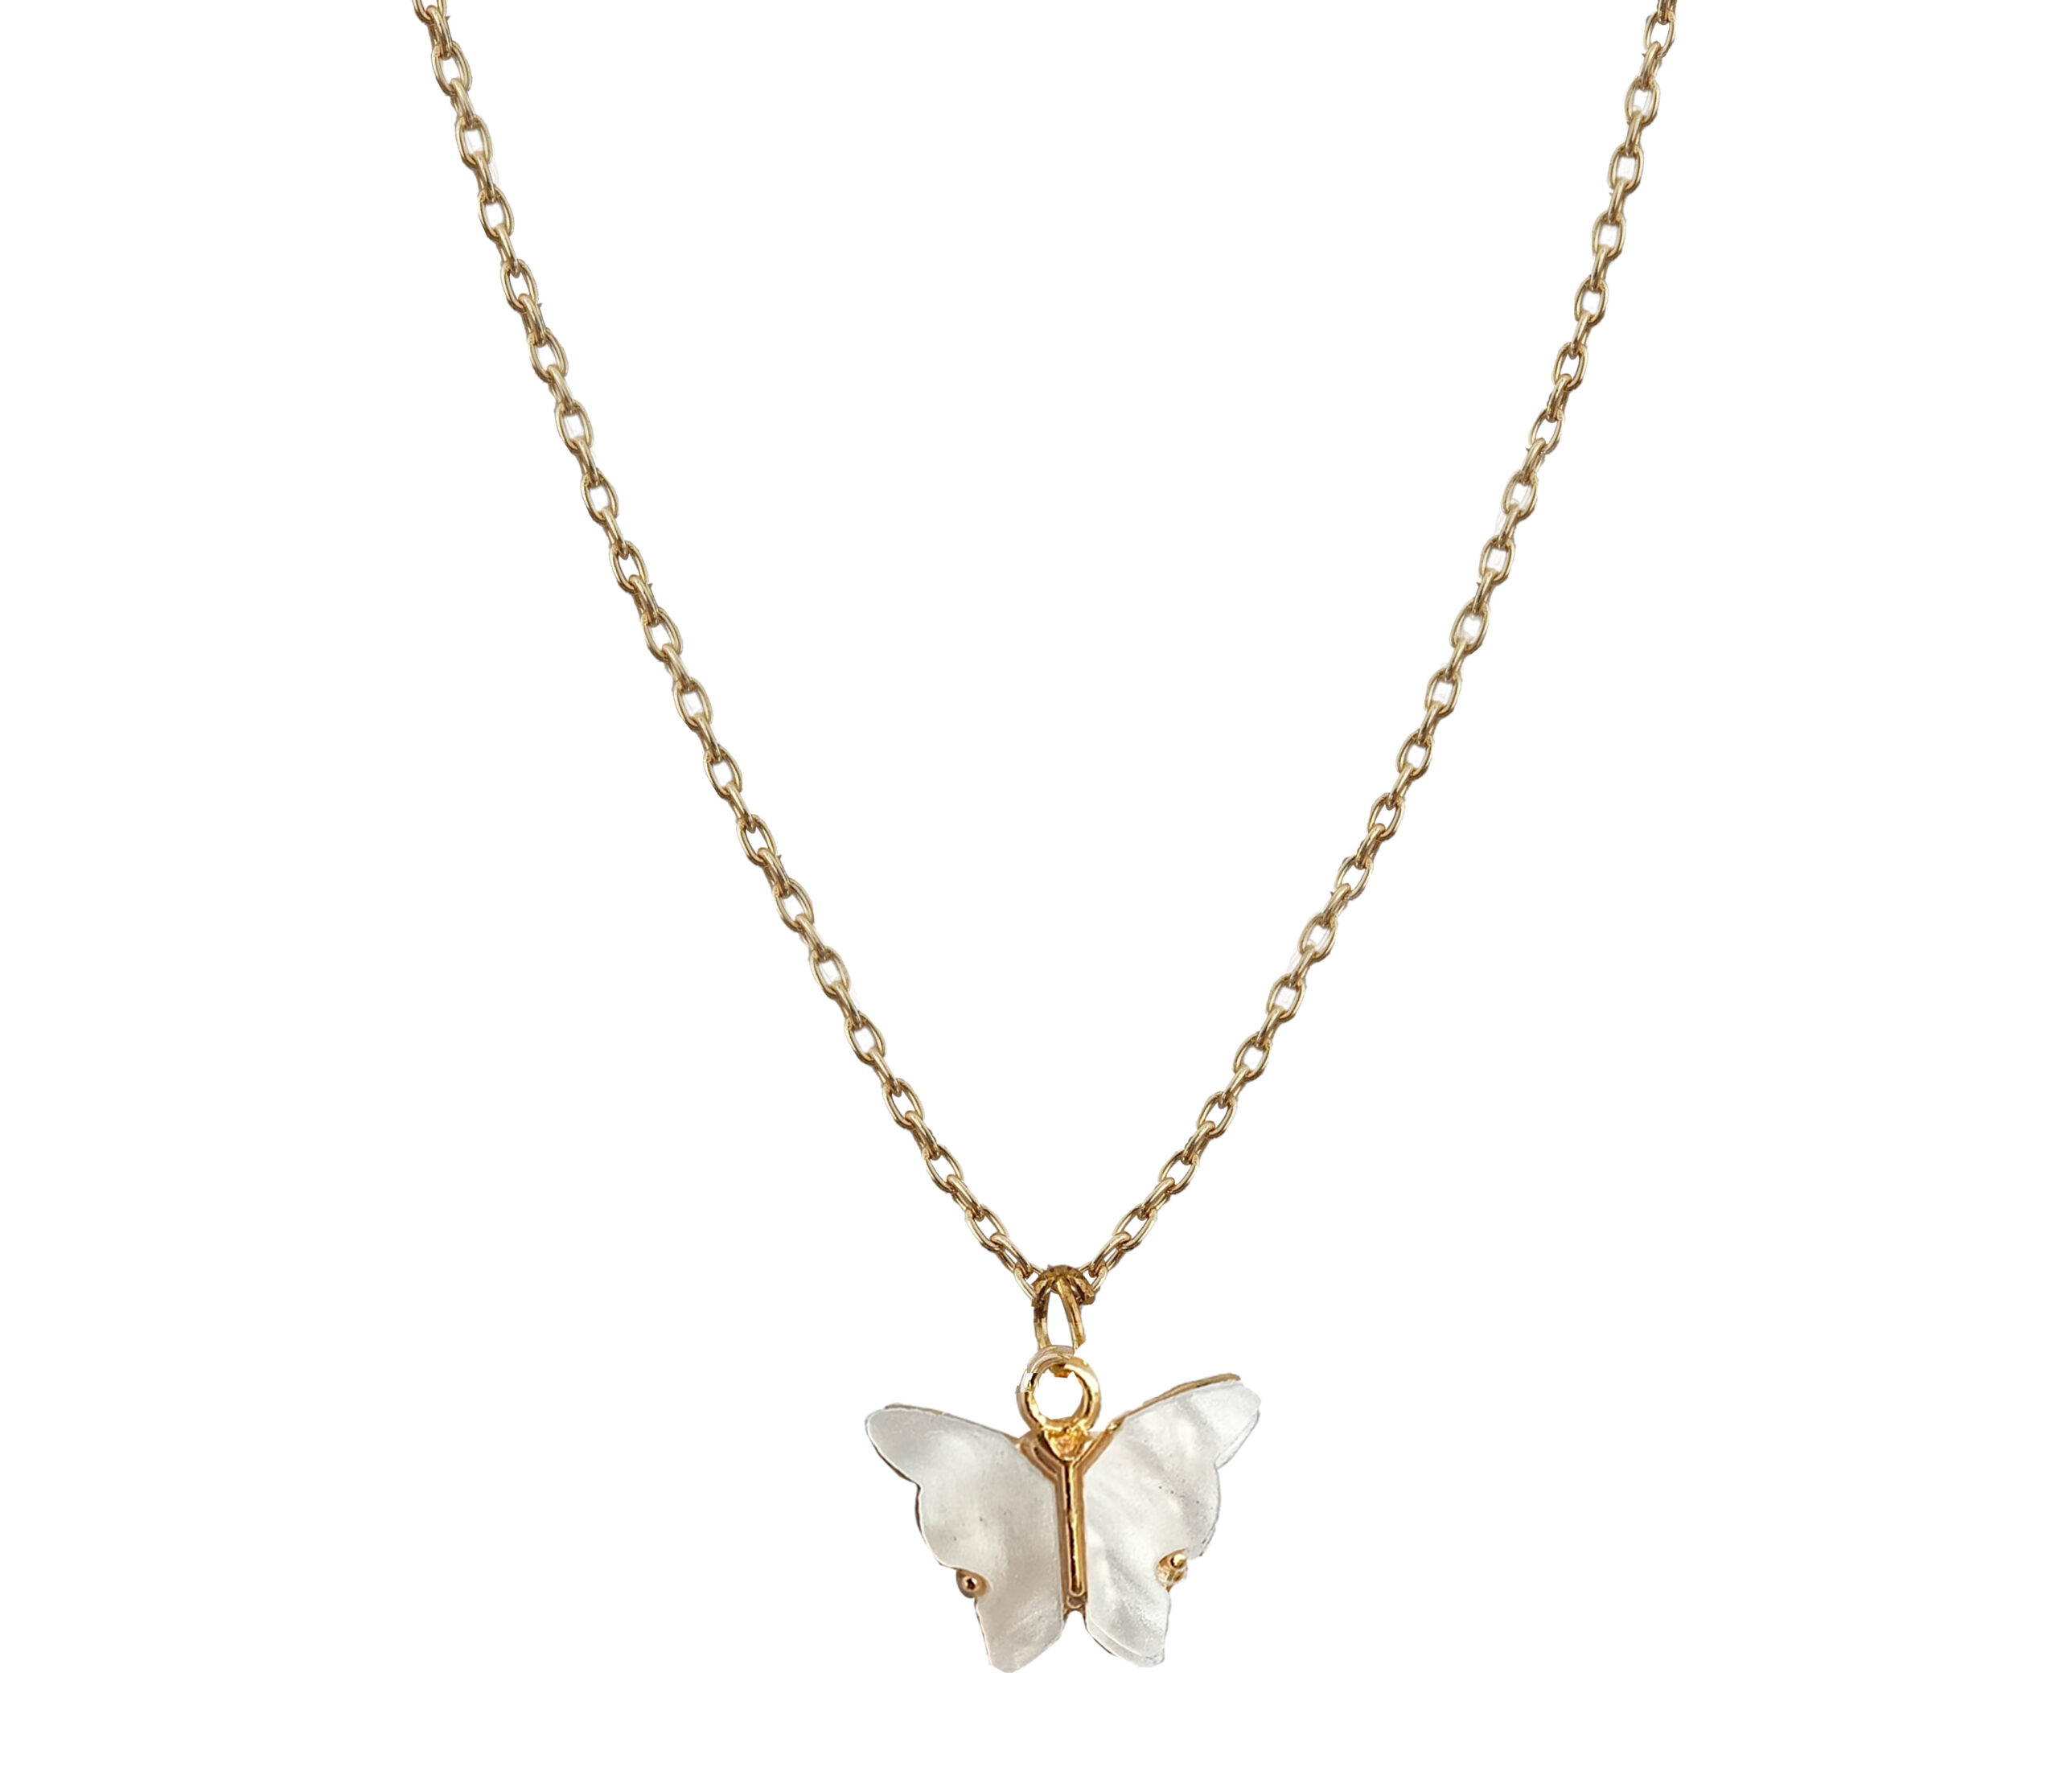 Natural Fancy Color Yellow Diamond Butterfly Pendant Chain for Women J